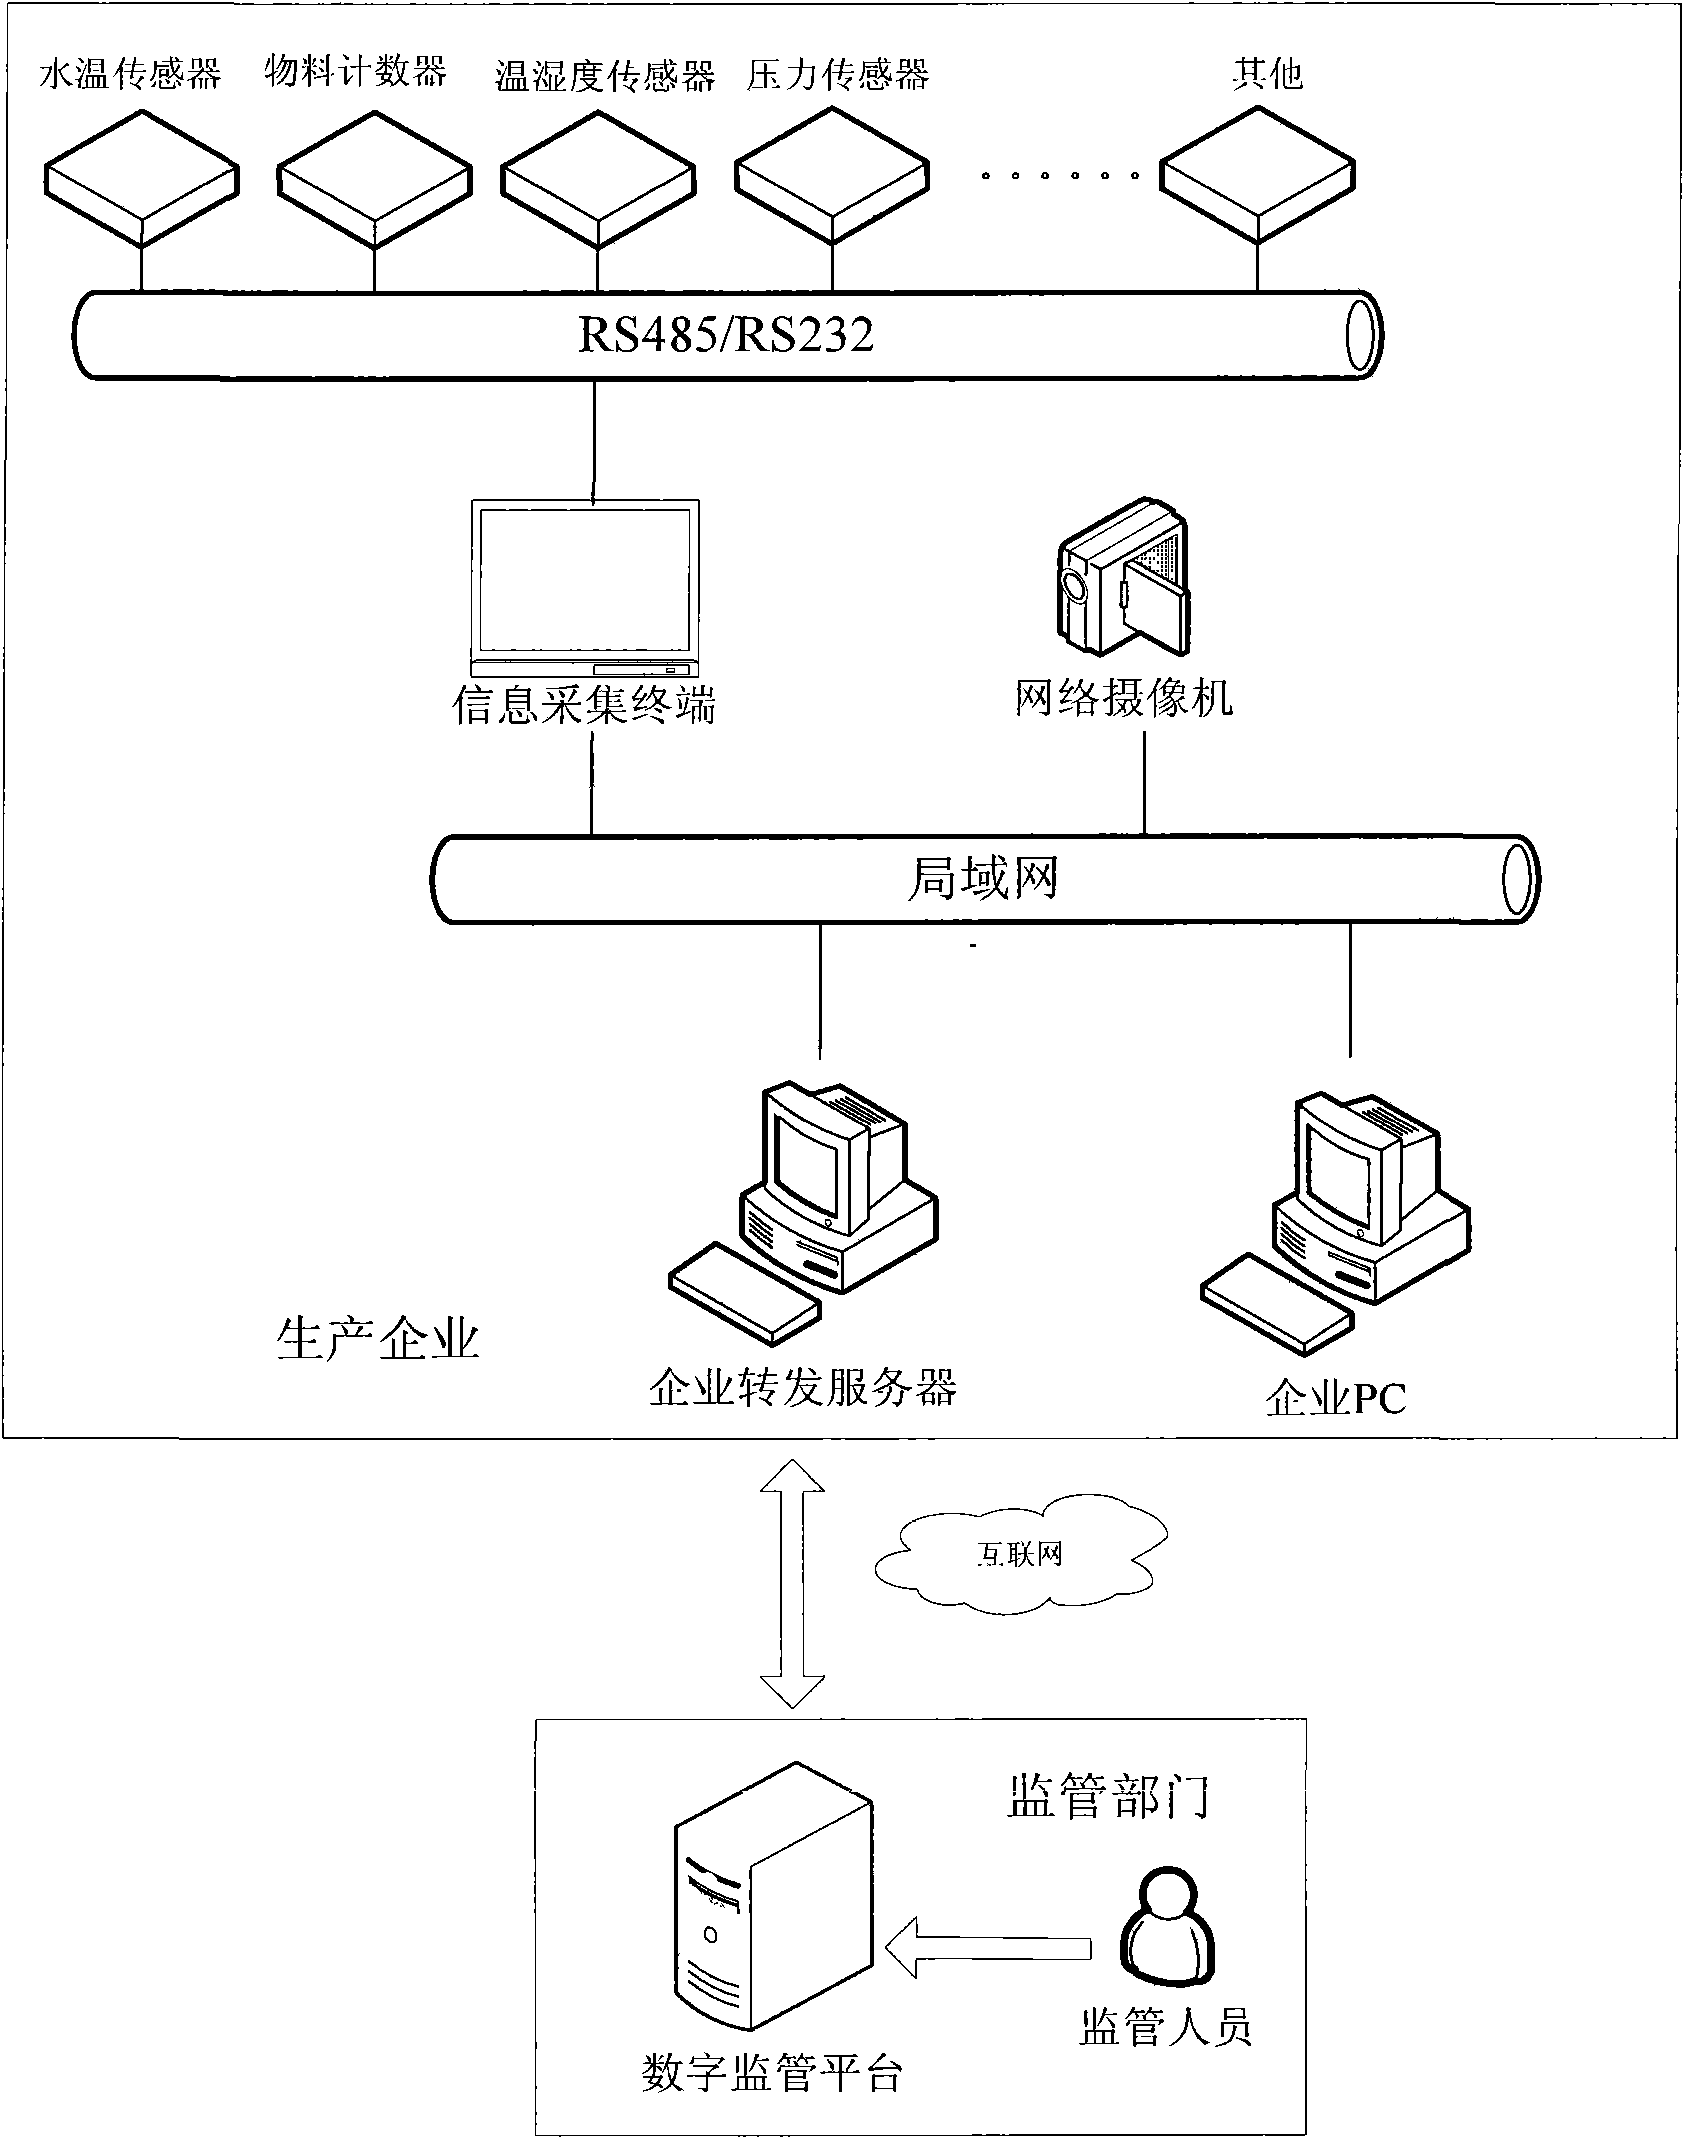 Method of real time and remote supervision of production environment and production flow of medicines